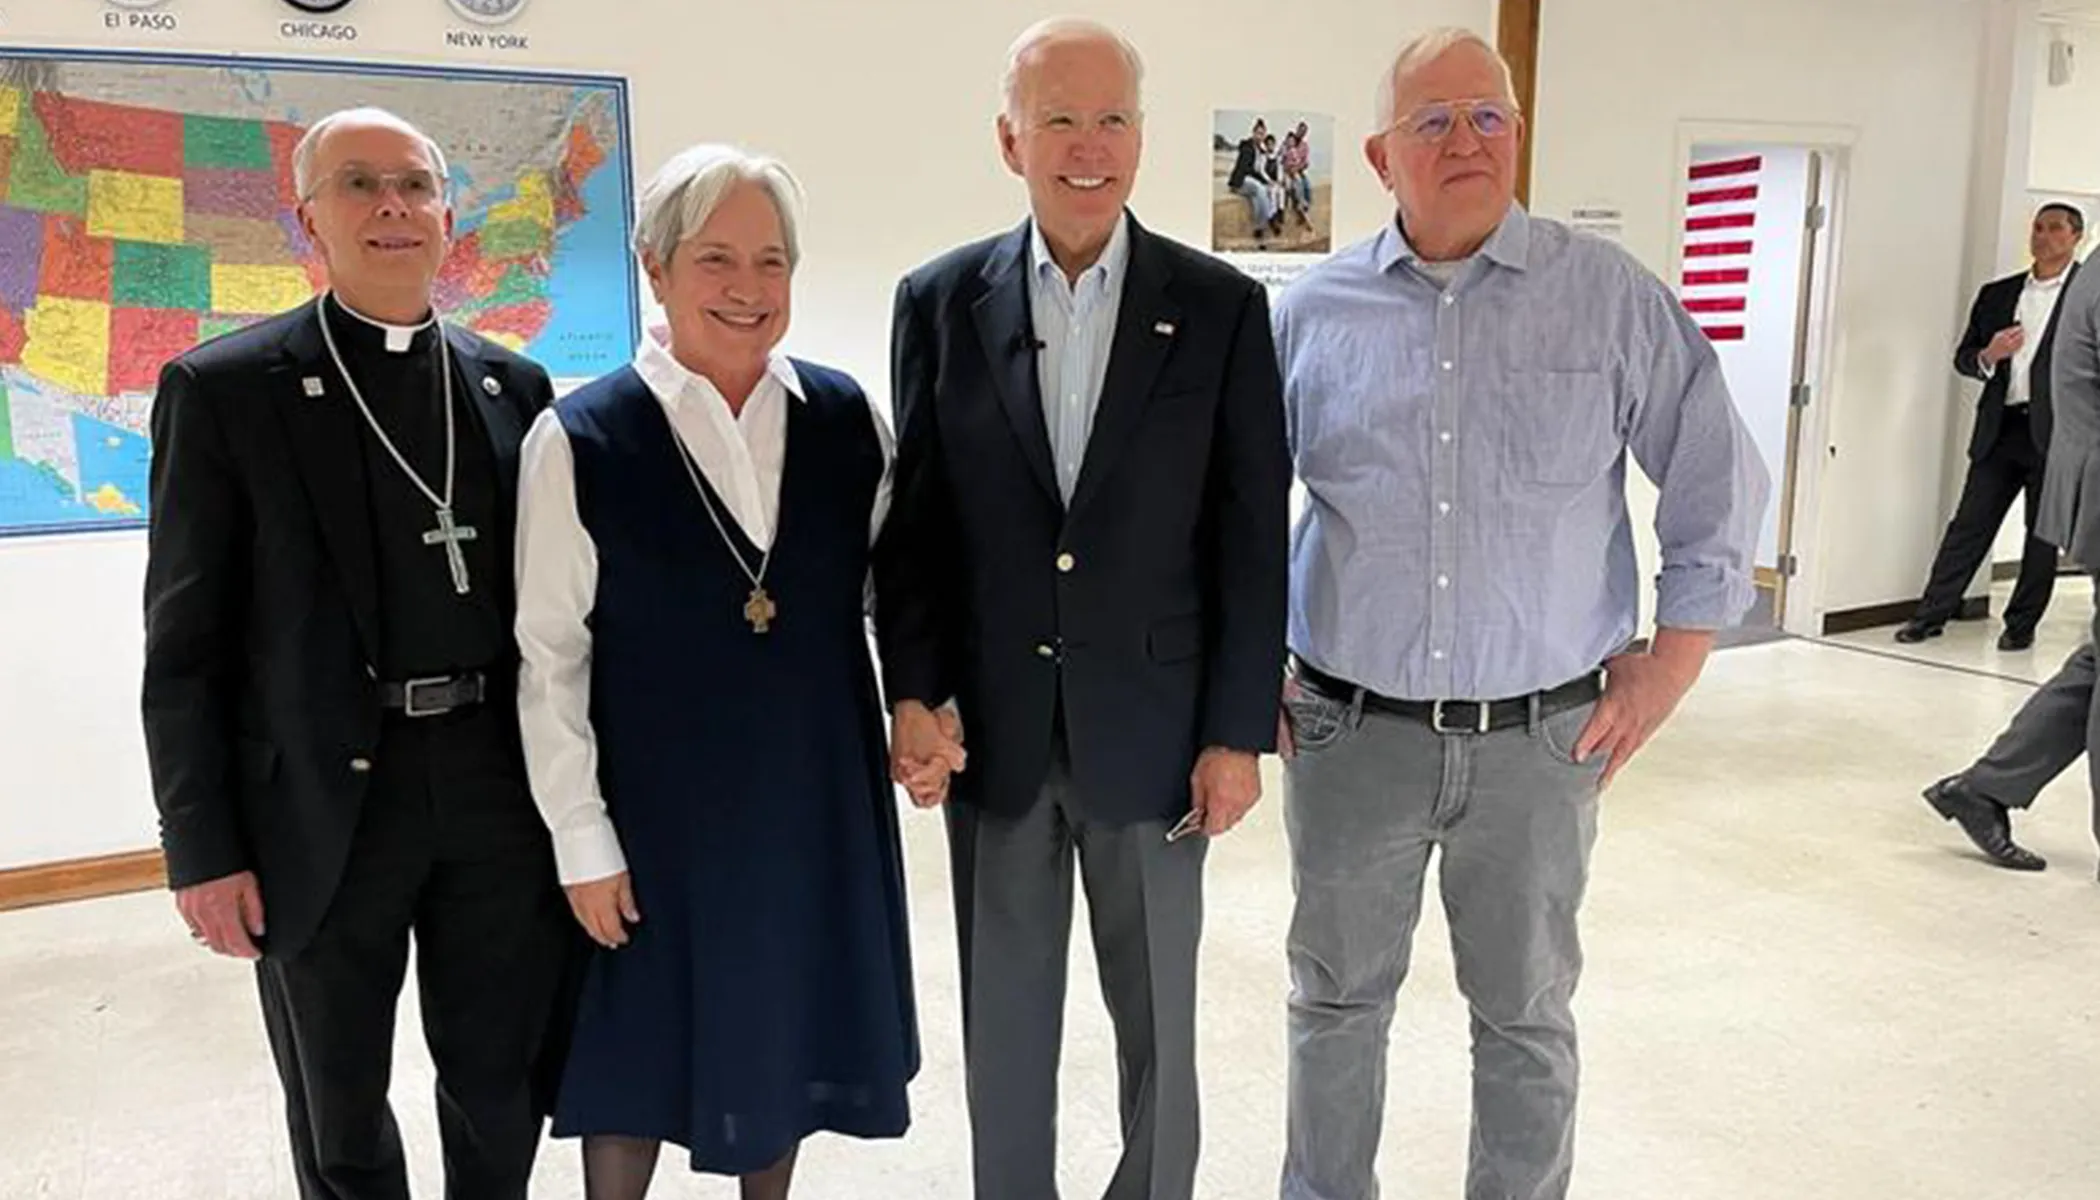 Key Catholic leaders ministering to migrants at the border pose for a photograph with President Joe Biden Jan. 8, 2023. Left to right: Bishop Seitz of El Paso, Texas; Sister Norma Pimental of Brownsville, Texas; and Ruben Garcia, director of migrant shelter Annunciation House.?w=200&h=150